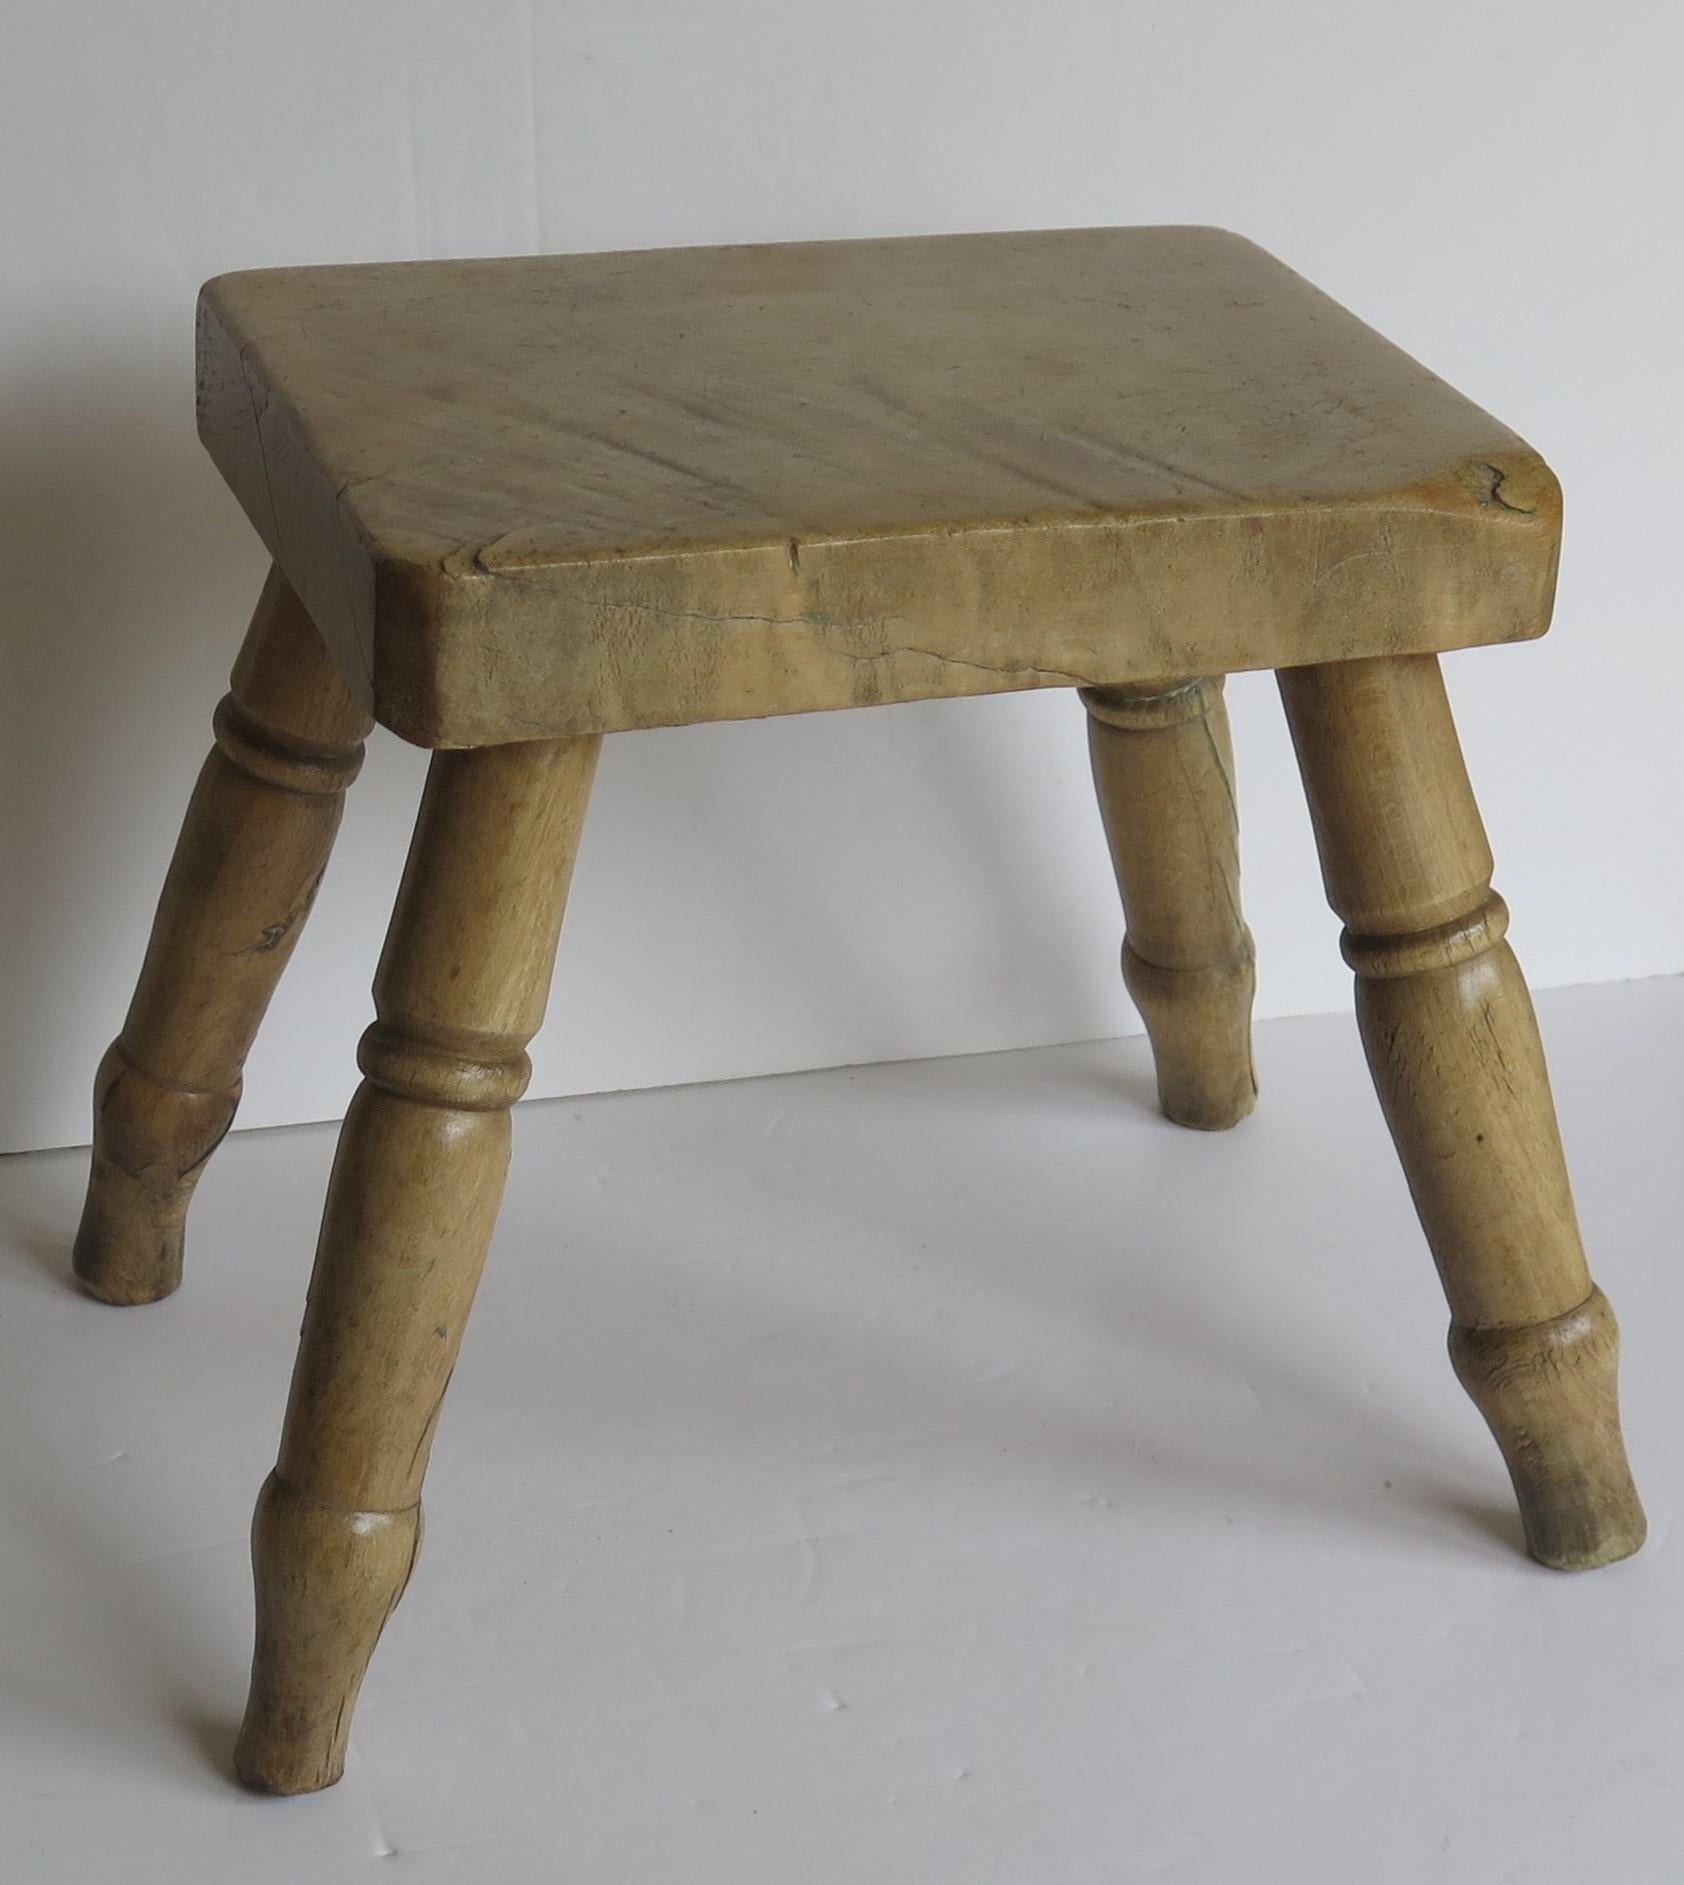 This antique hand-made milking stool or stand is a good example of English Country furniture, made out of sycamore with turned legs and a lovely depth of colour, all dating to the early Victorian period circa 1840.

The thick rectangular top has